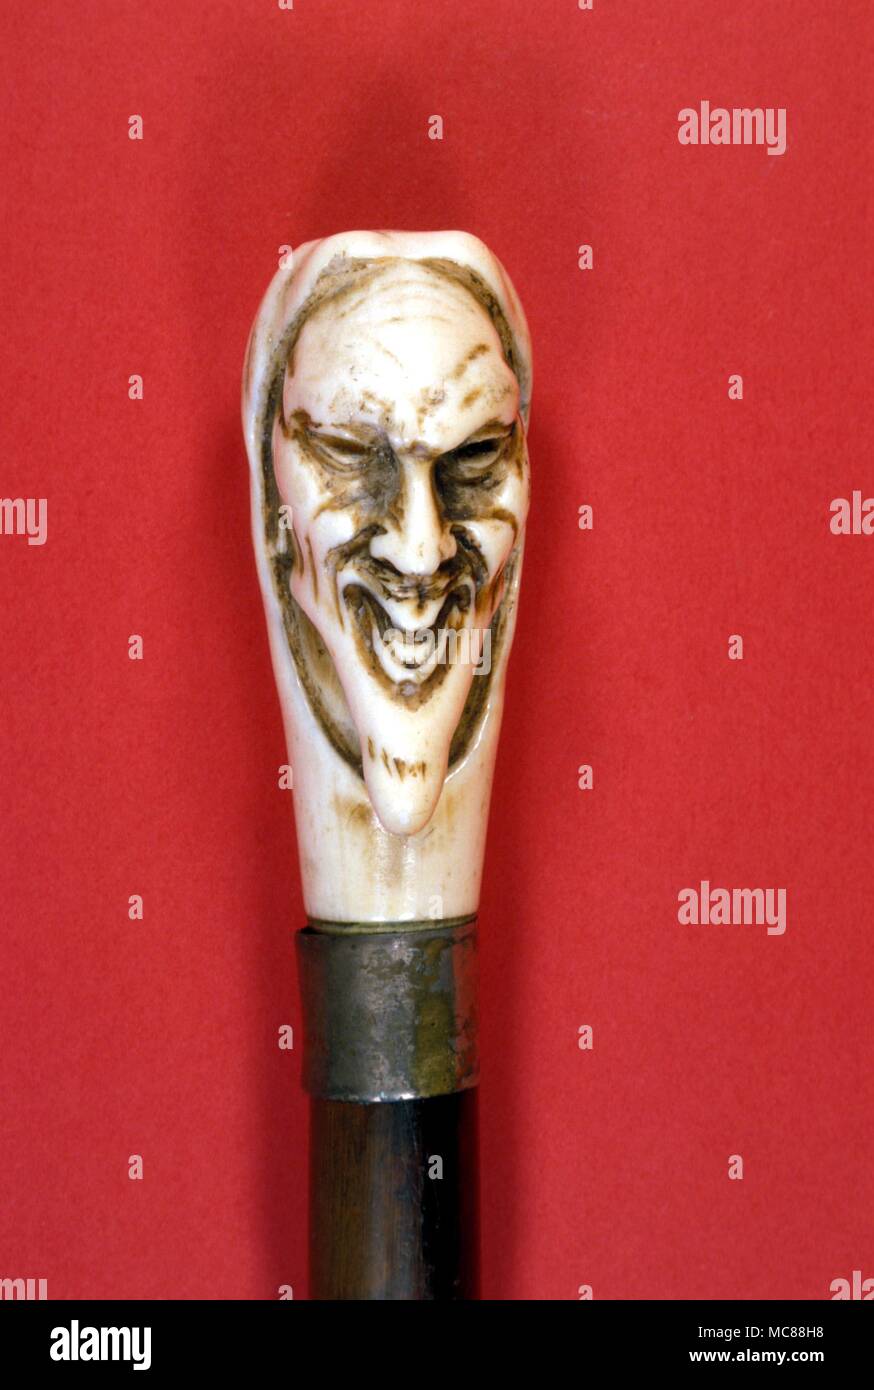 WIT5039 - WITCHCRAFT Demonic head on top of a ritual wand used in conjuration and witchcraft. Stock Photo